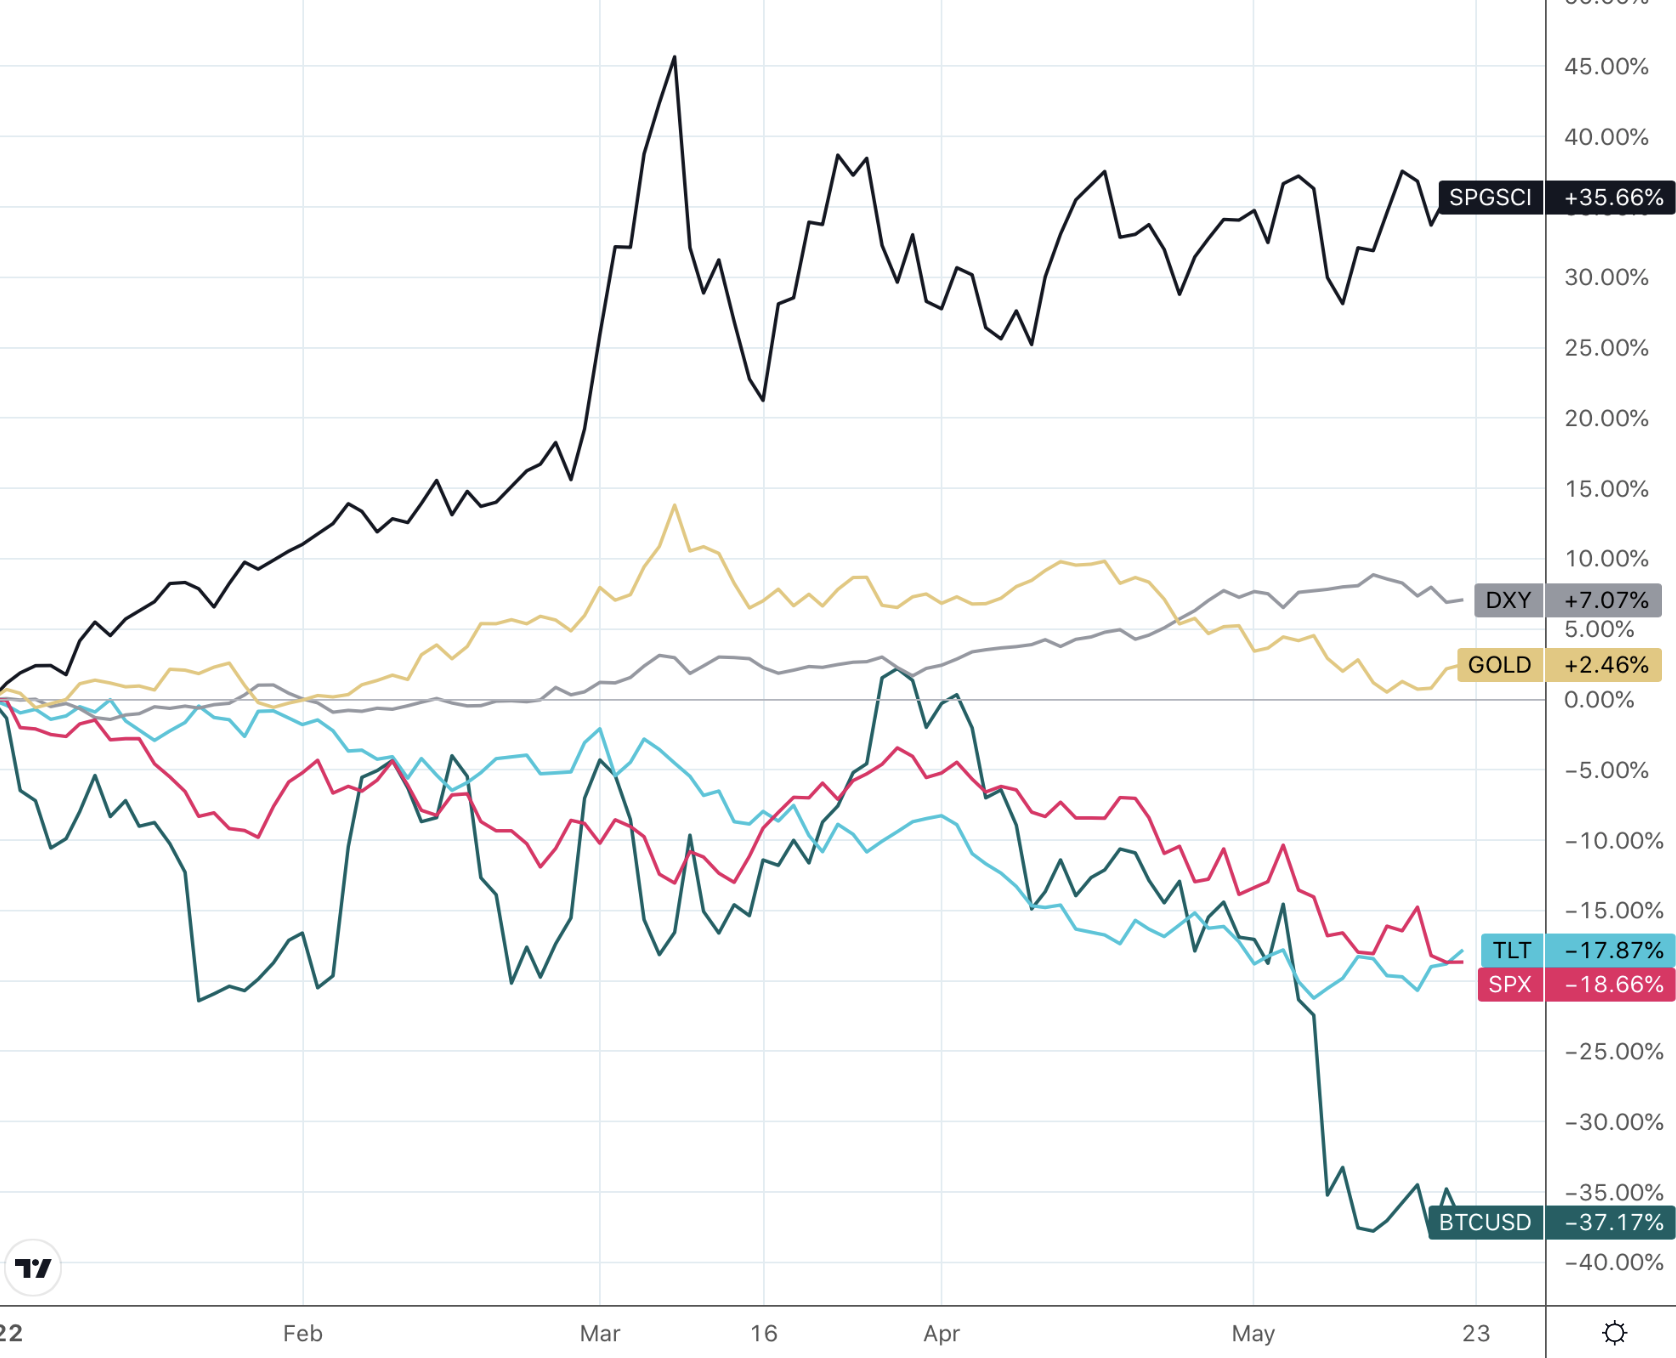 overlay line chart showing the performance of various investment categories year to date commodities, the dollar, gold, stocks, bonds and bitcoin